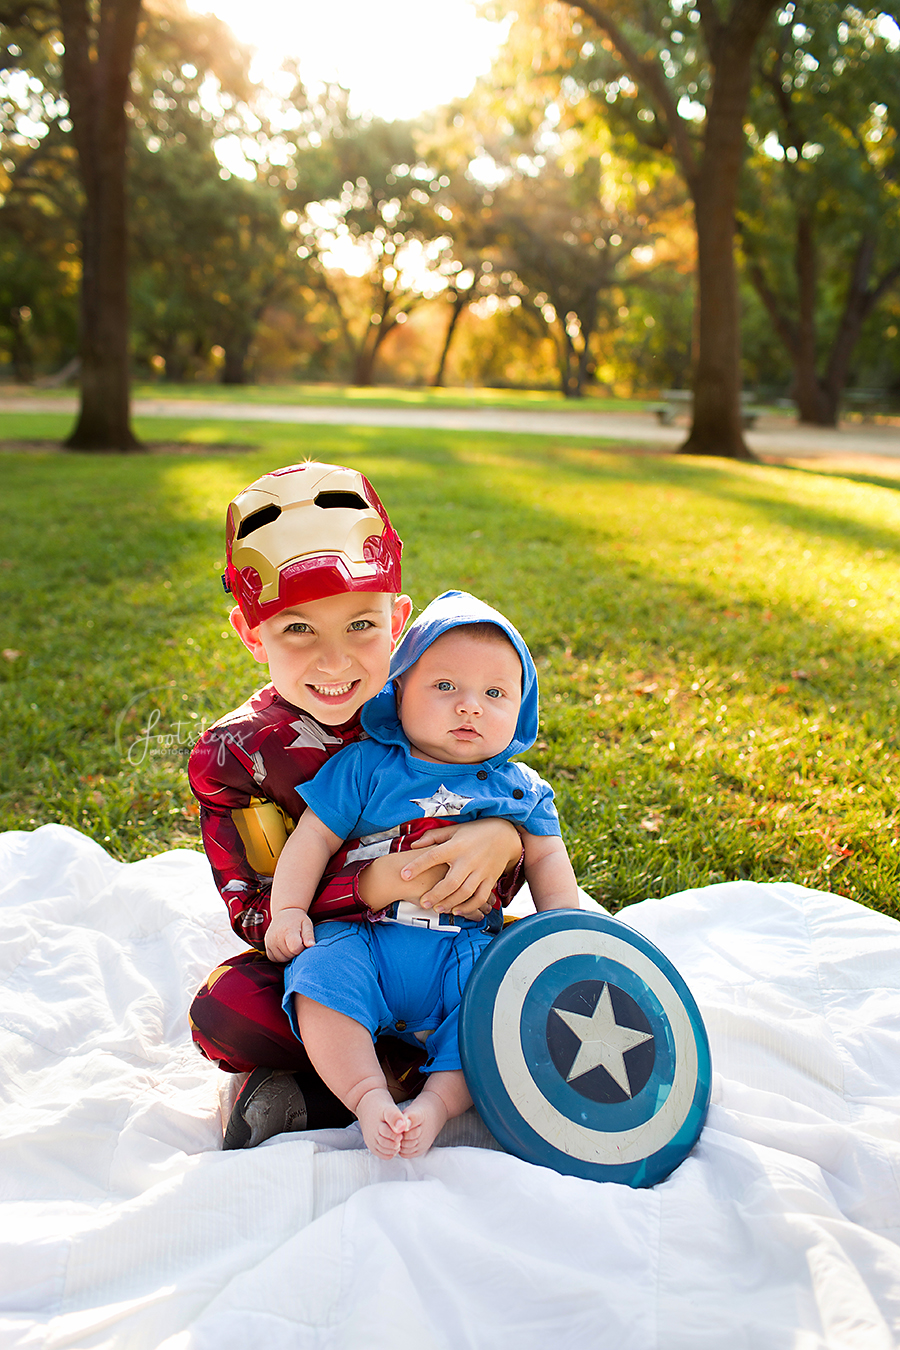 captain america and ironman in vacaville park